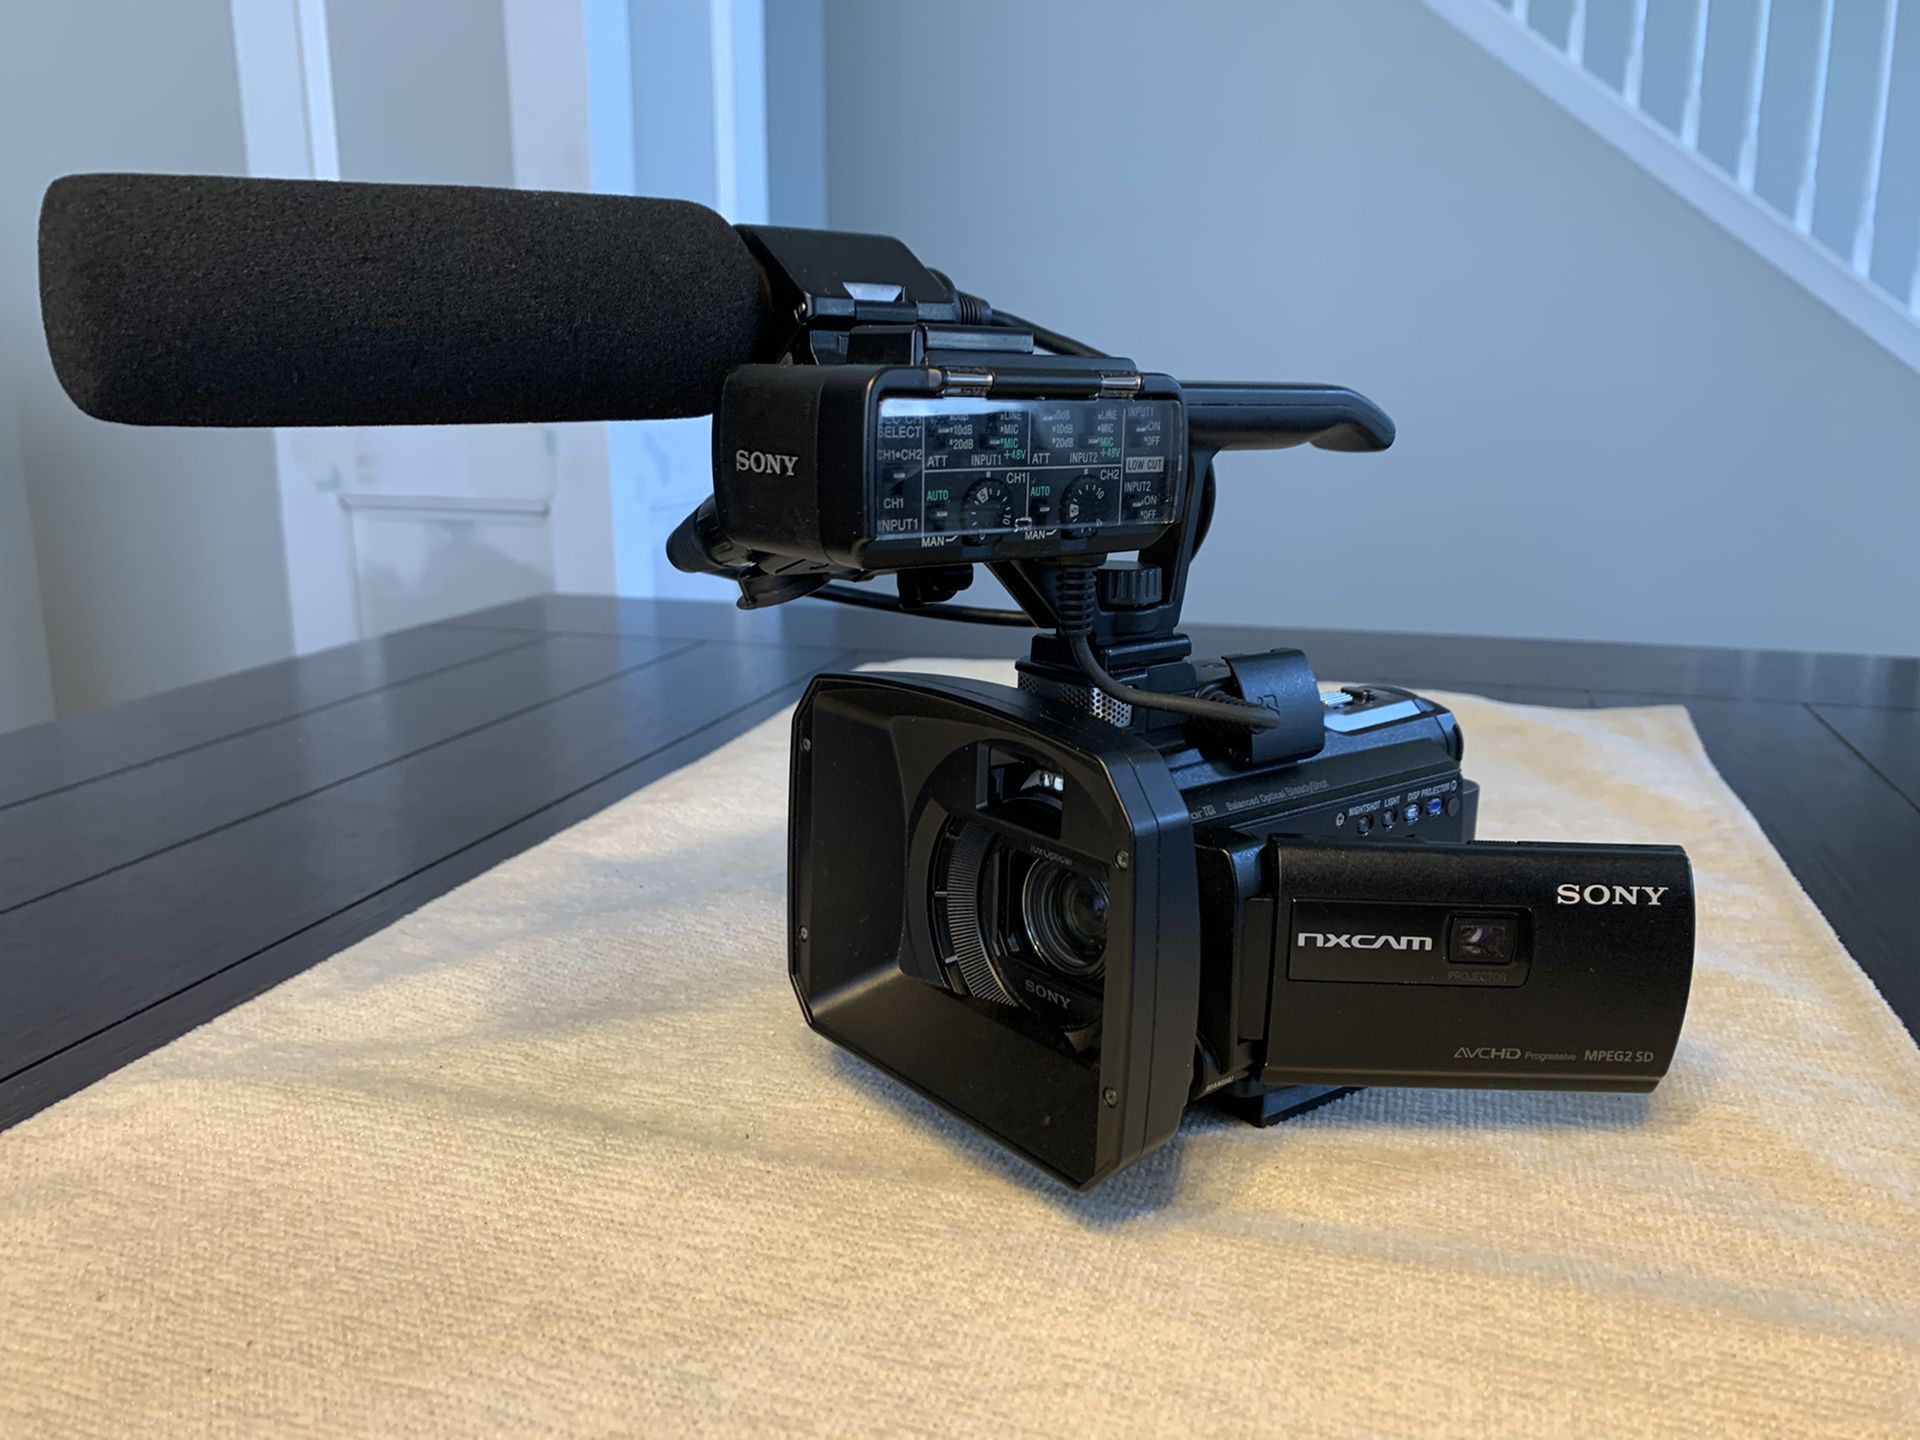 Sony NXCAM HD Camcorder